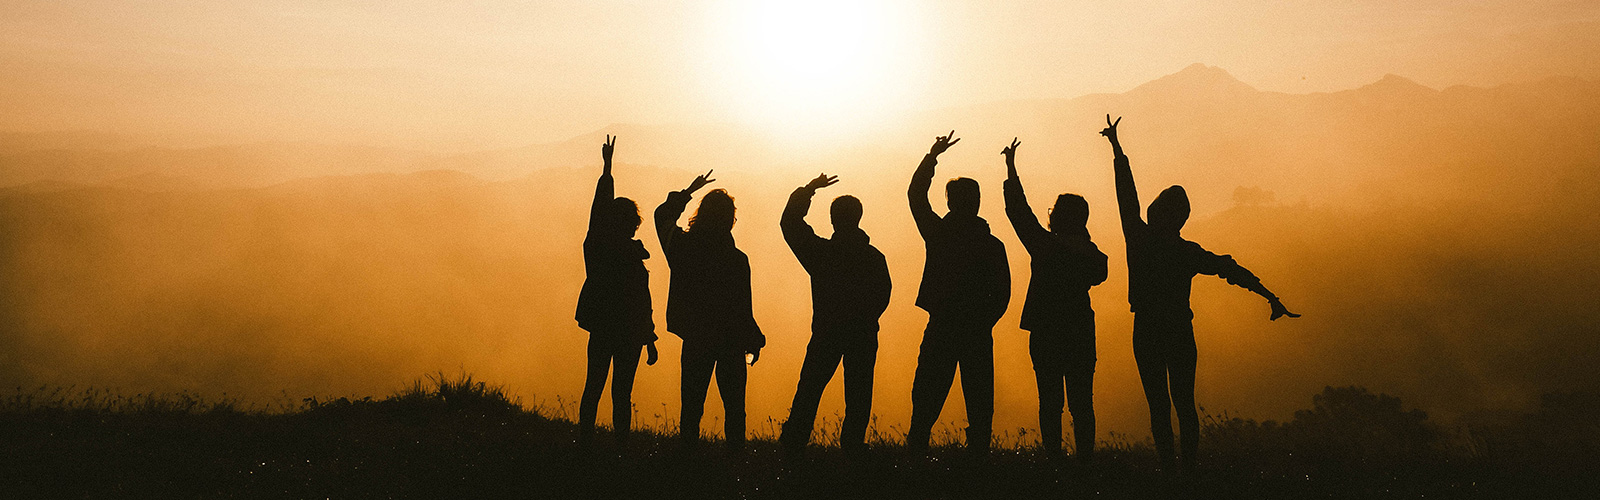 Silhouette of 6 people holding their right hand in the air, showing a peace sign with their fingers. People stand on grass, with a sunset on mountains in the background